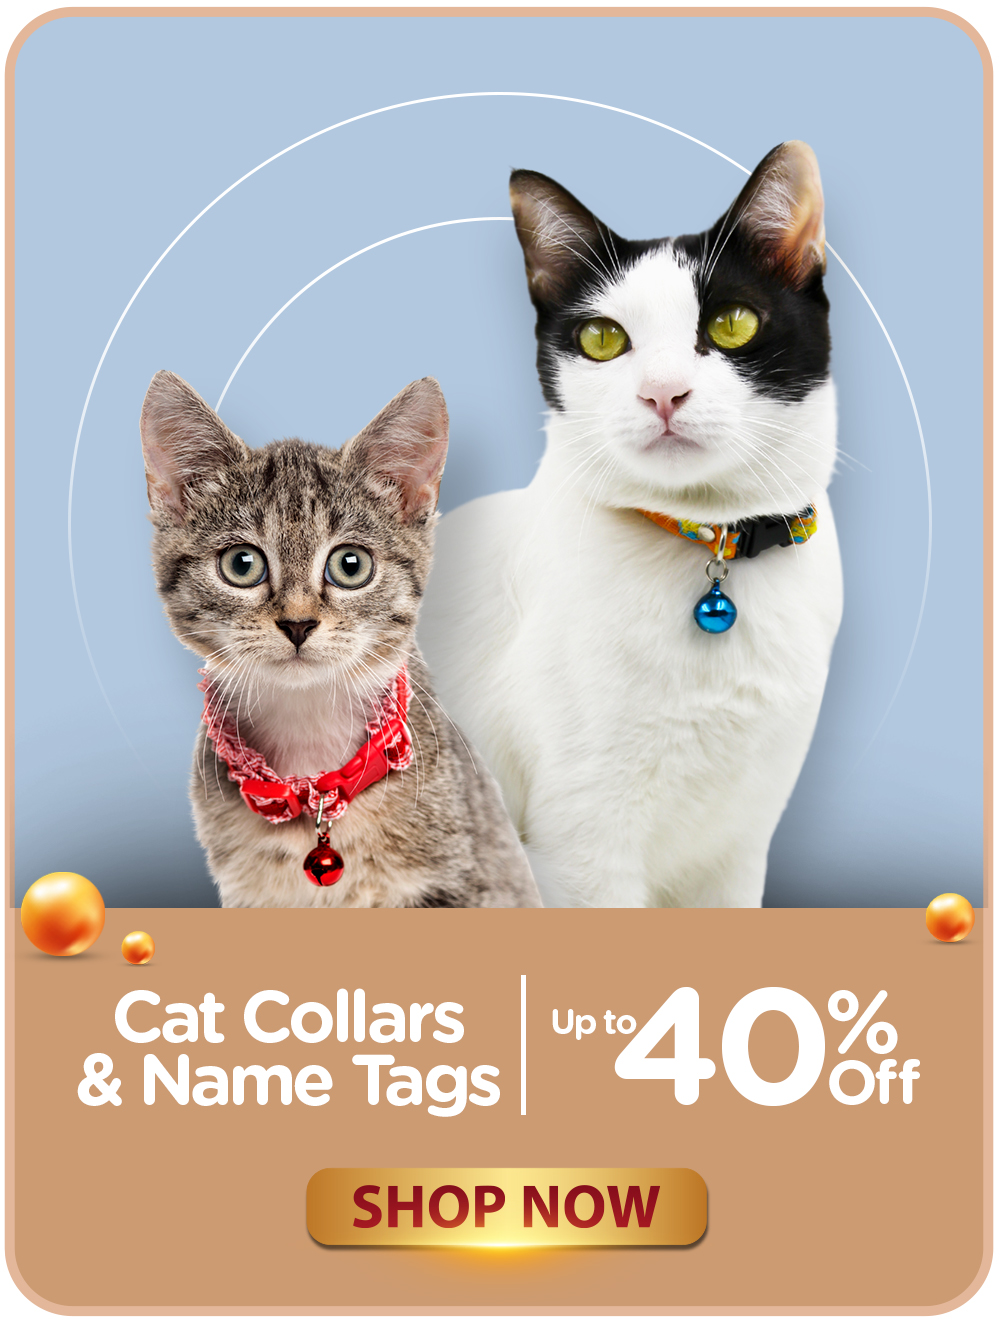 09 - CATEGORY BANNERS - CAT COLLARS NAMETAGS VER2